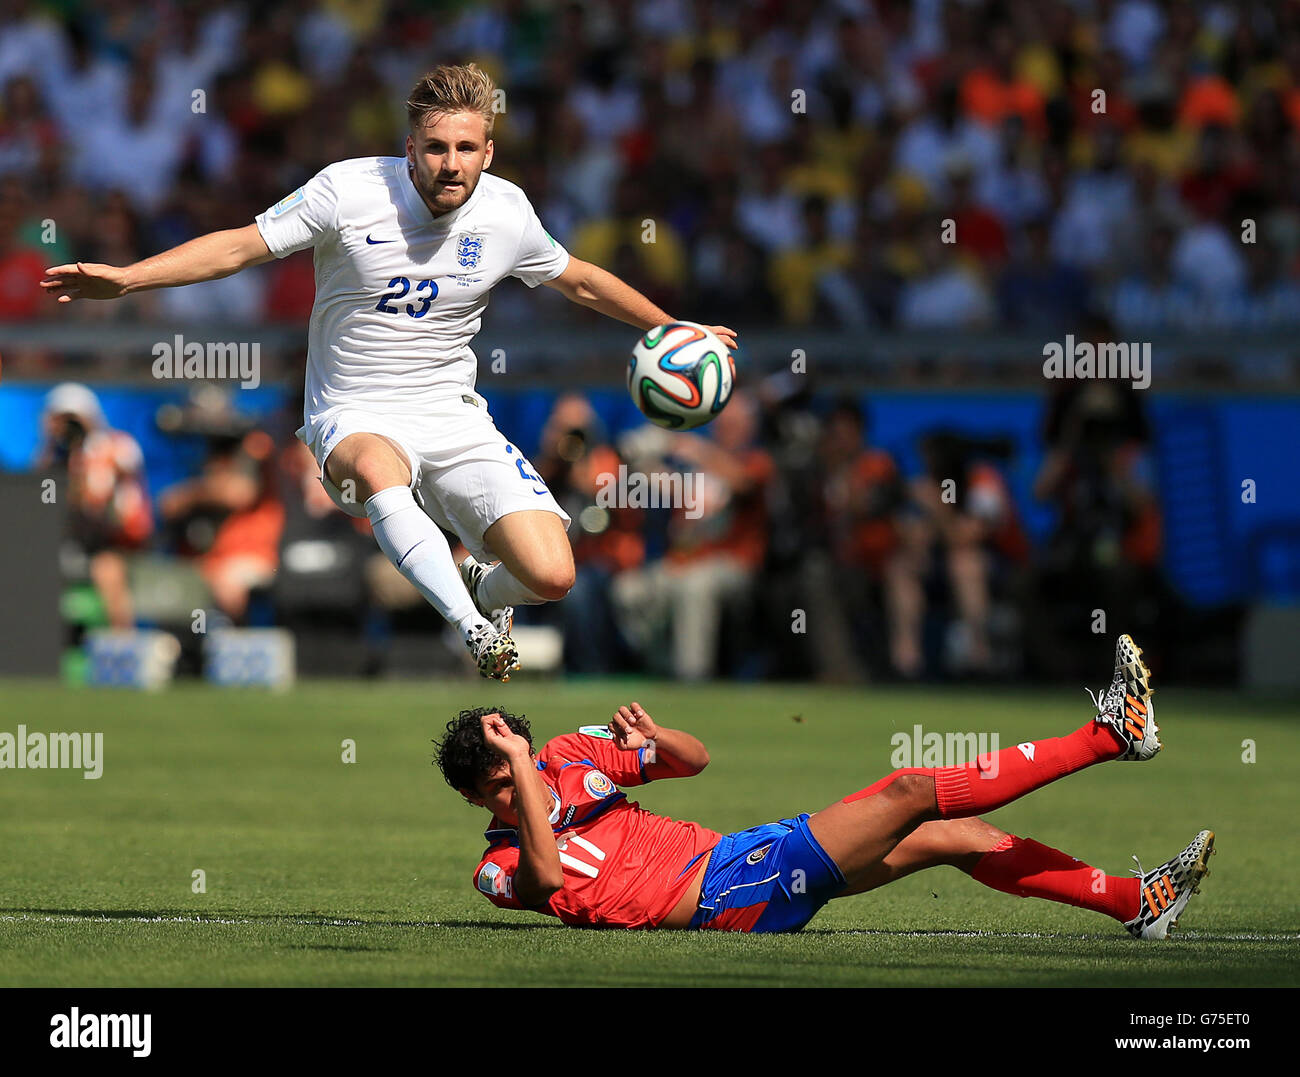 England's Luke Shaw hurdles a challenge from Costa Rica's Yeltsin Tejeda (floor) as they battle for the ball during the FIFA World Cup, Group D match at the Estadio Mineirao, Belo Horizonte, Brazil. Stock Photo